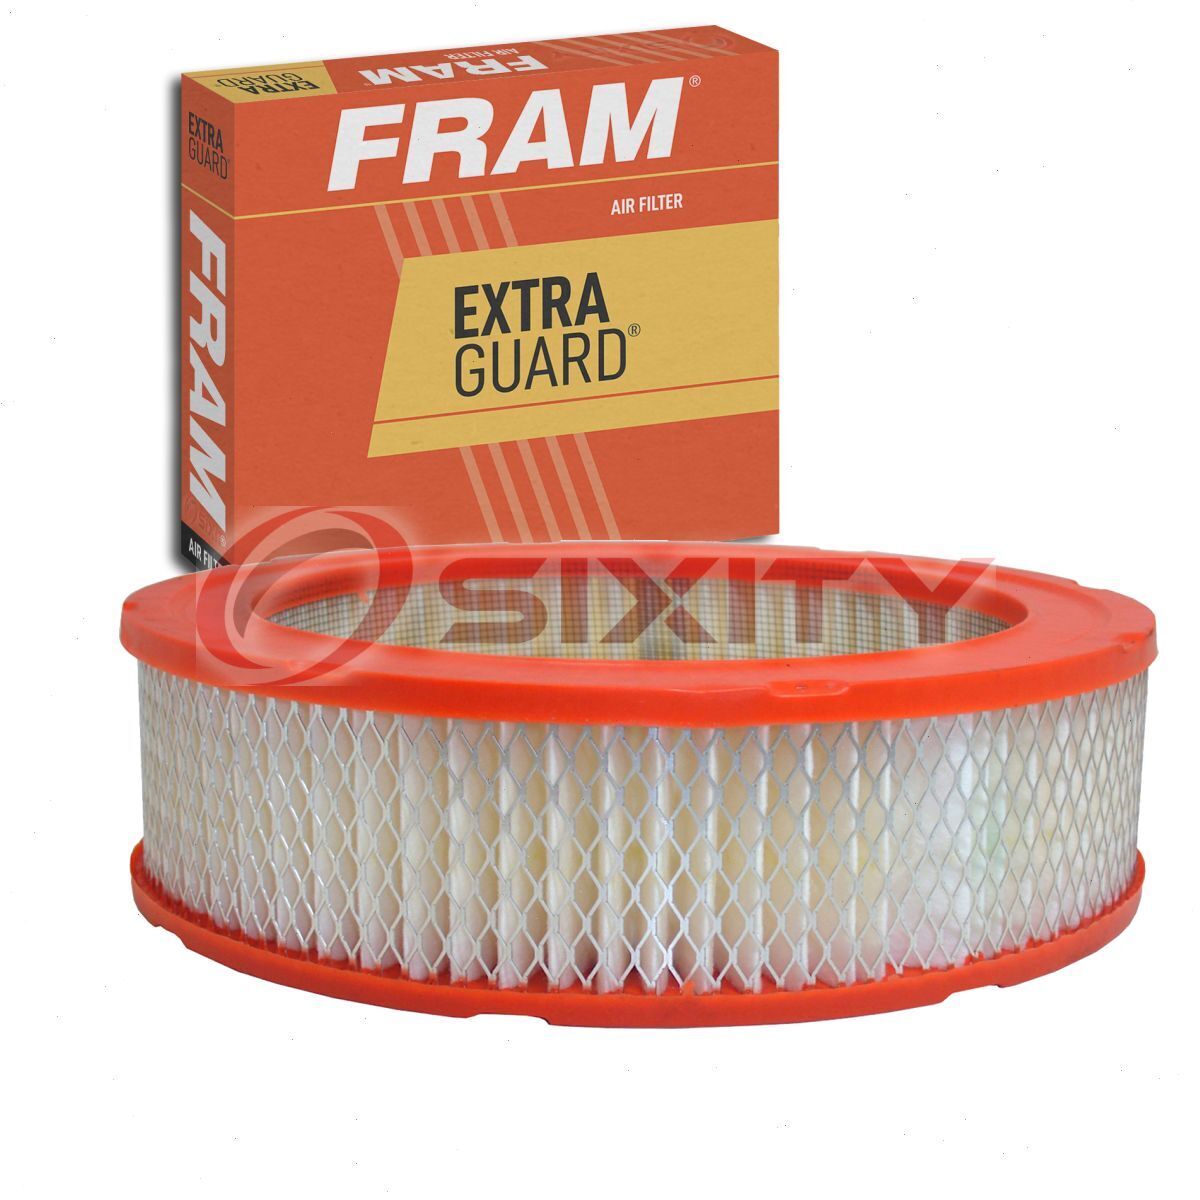 FRAM Extra Guard Air Filter for 1965-1974 Plymouth Satellite Intake Inlet fw